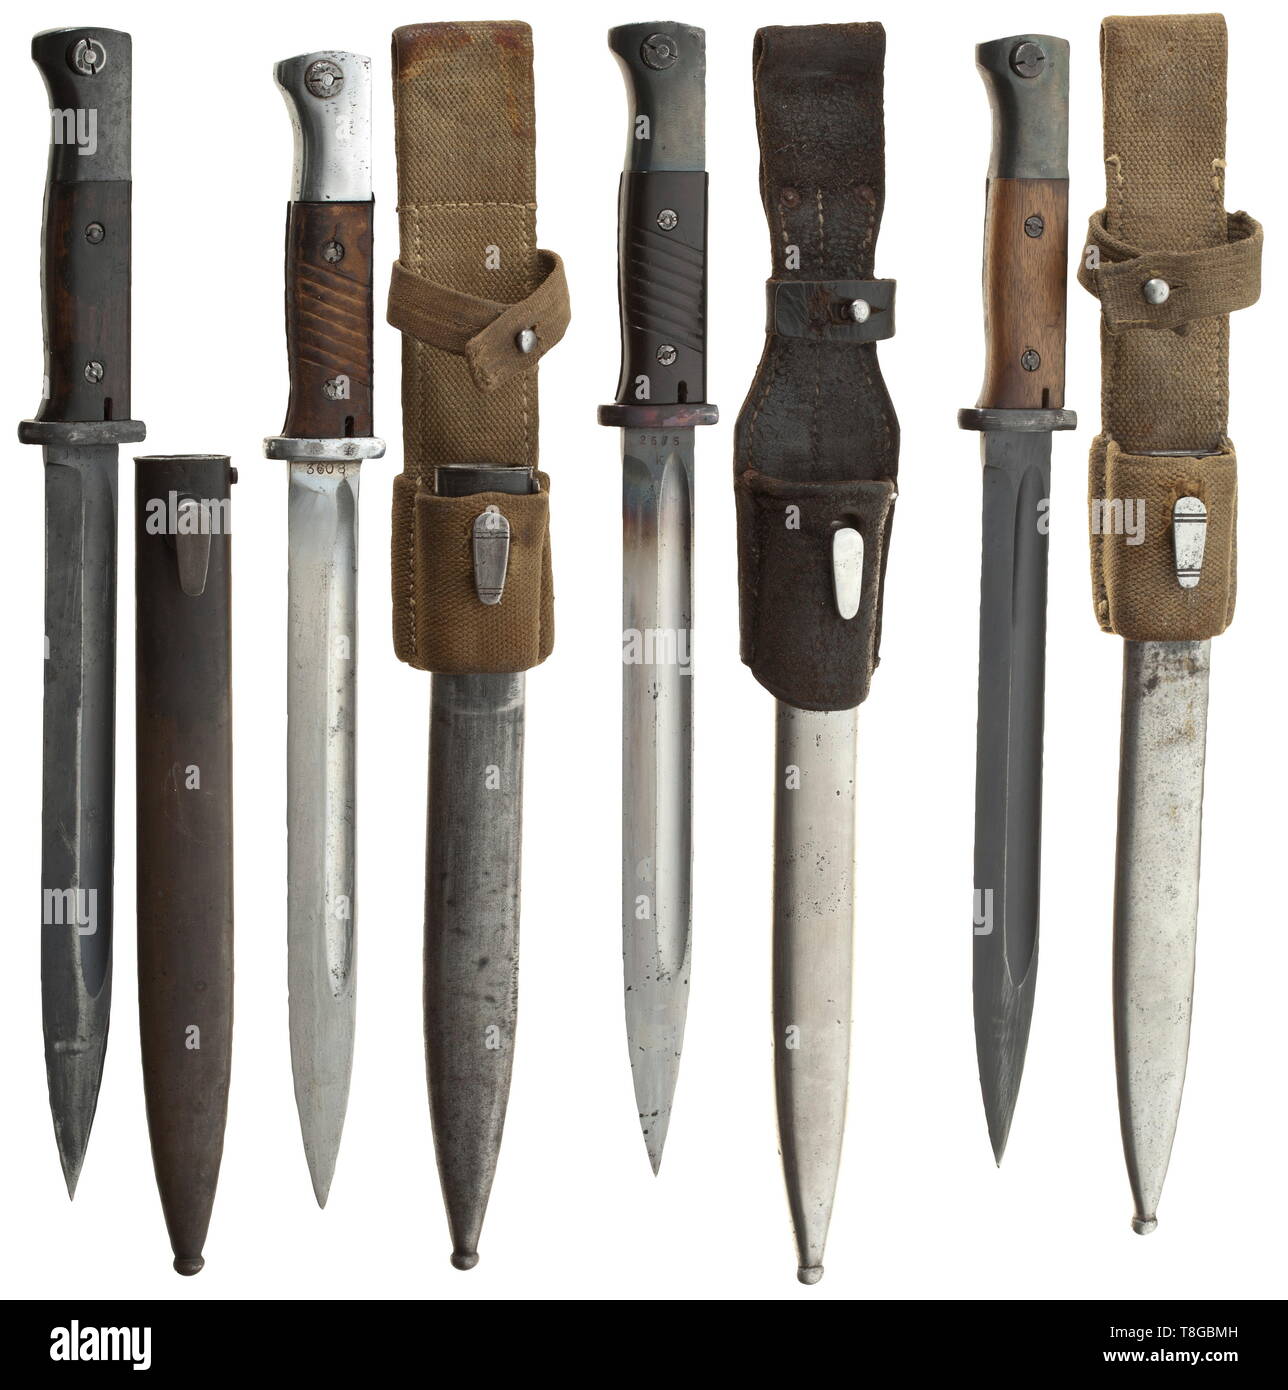 30 bayonets M 84/98 and two further models No matching numbers. Manufacturer (partly coded) e. g. Eickhorn, Höller, Alcoso, Hörster. 14 bayonets with wooden grip panels, complete with sheaths and frogs (two of them web strap), one specimen without frog and five without sheaths. Seven bayonets with Bakelite grip panels (three of them with sheaths and leather frogs, four without sheaths). On top of this KS 98 with sheath (manufacturer Wingen, Solingen) and another European model. Partly lightly damaged, traces of usage and age. Length circa 35 - 40, Additional-Rights-Clearance-Info-Not-Available Stock Photo